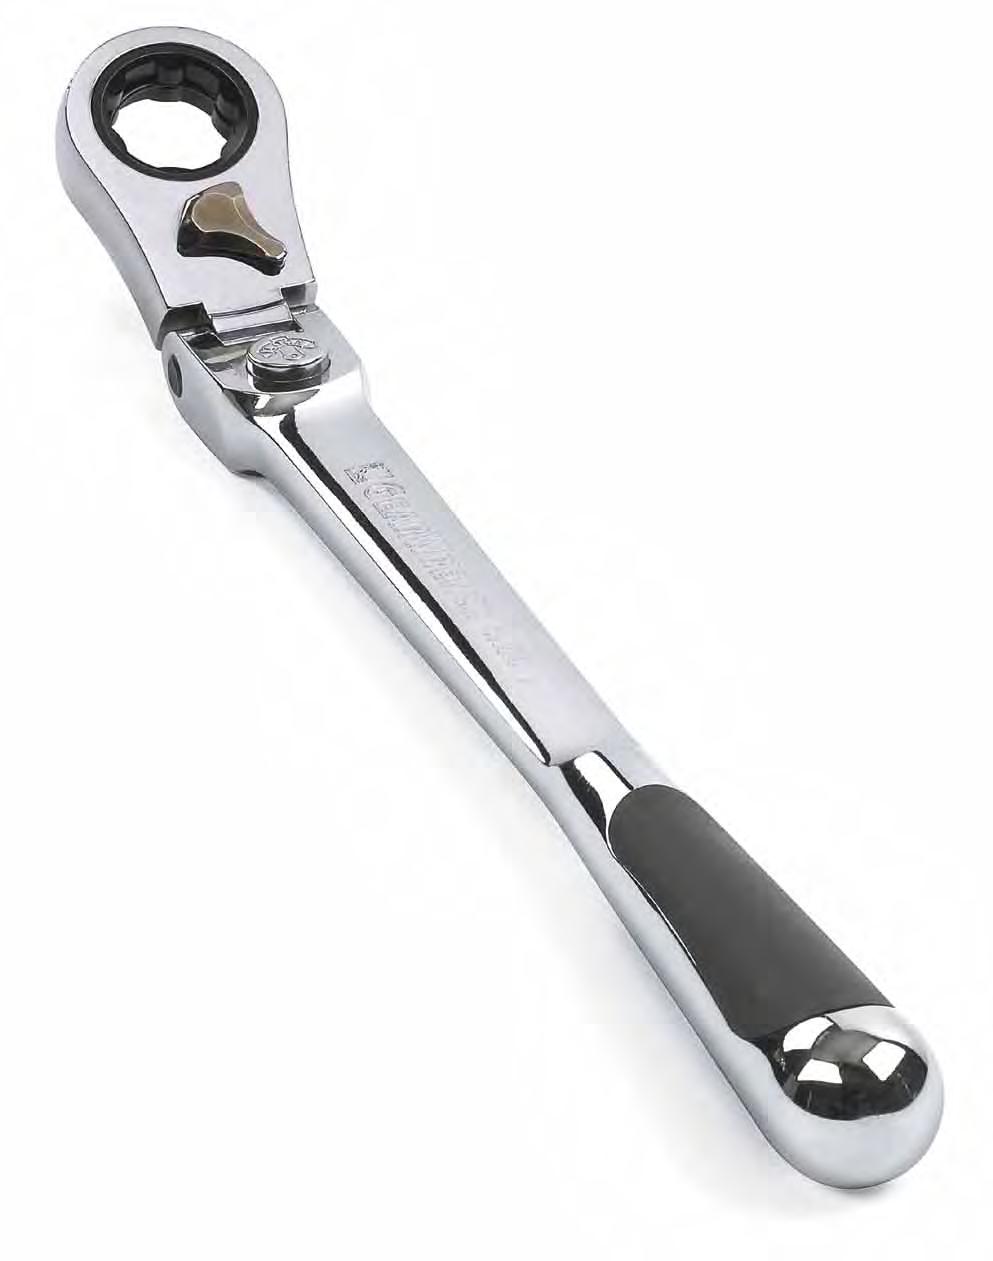 RATCHETS, SOCKETS & DRIVE TOOLS LOCKING FLEX GEARWRENCH PASS-THRU RATCHET Pass-Thru Ratchet & Socket System features the Vortex drive